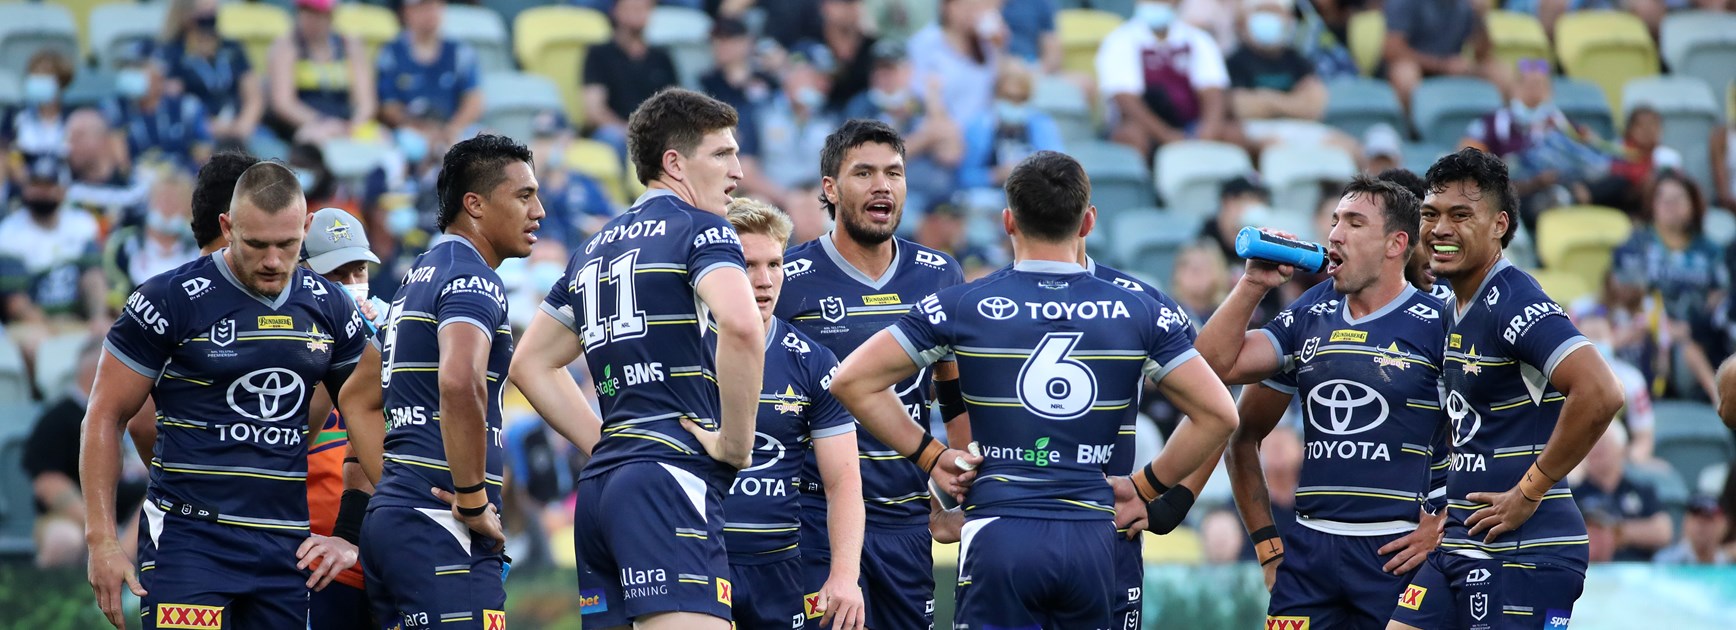 We gave up: Payten slams Cowboys' lack of mental resilience